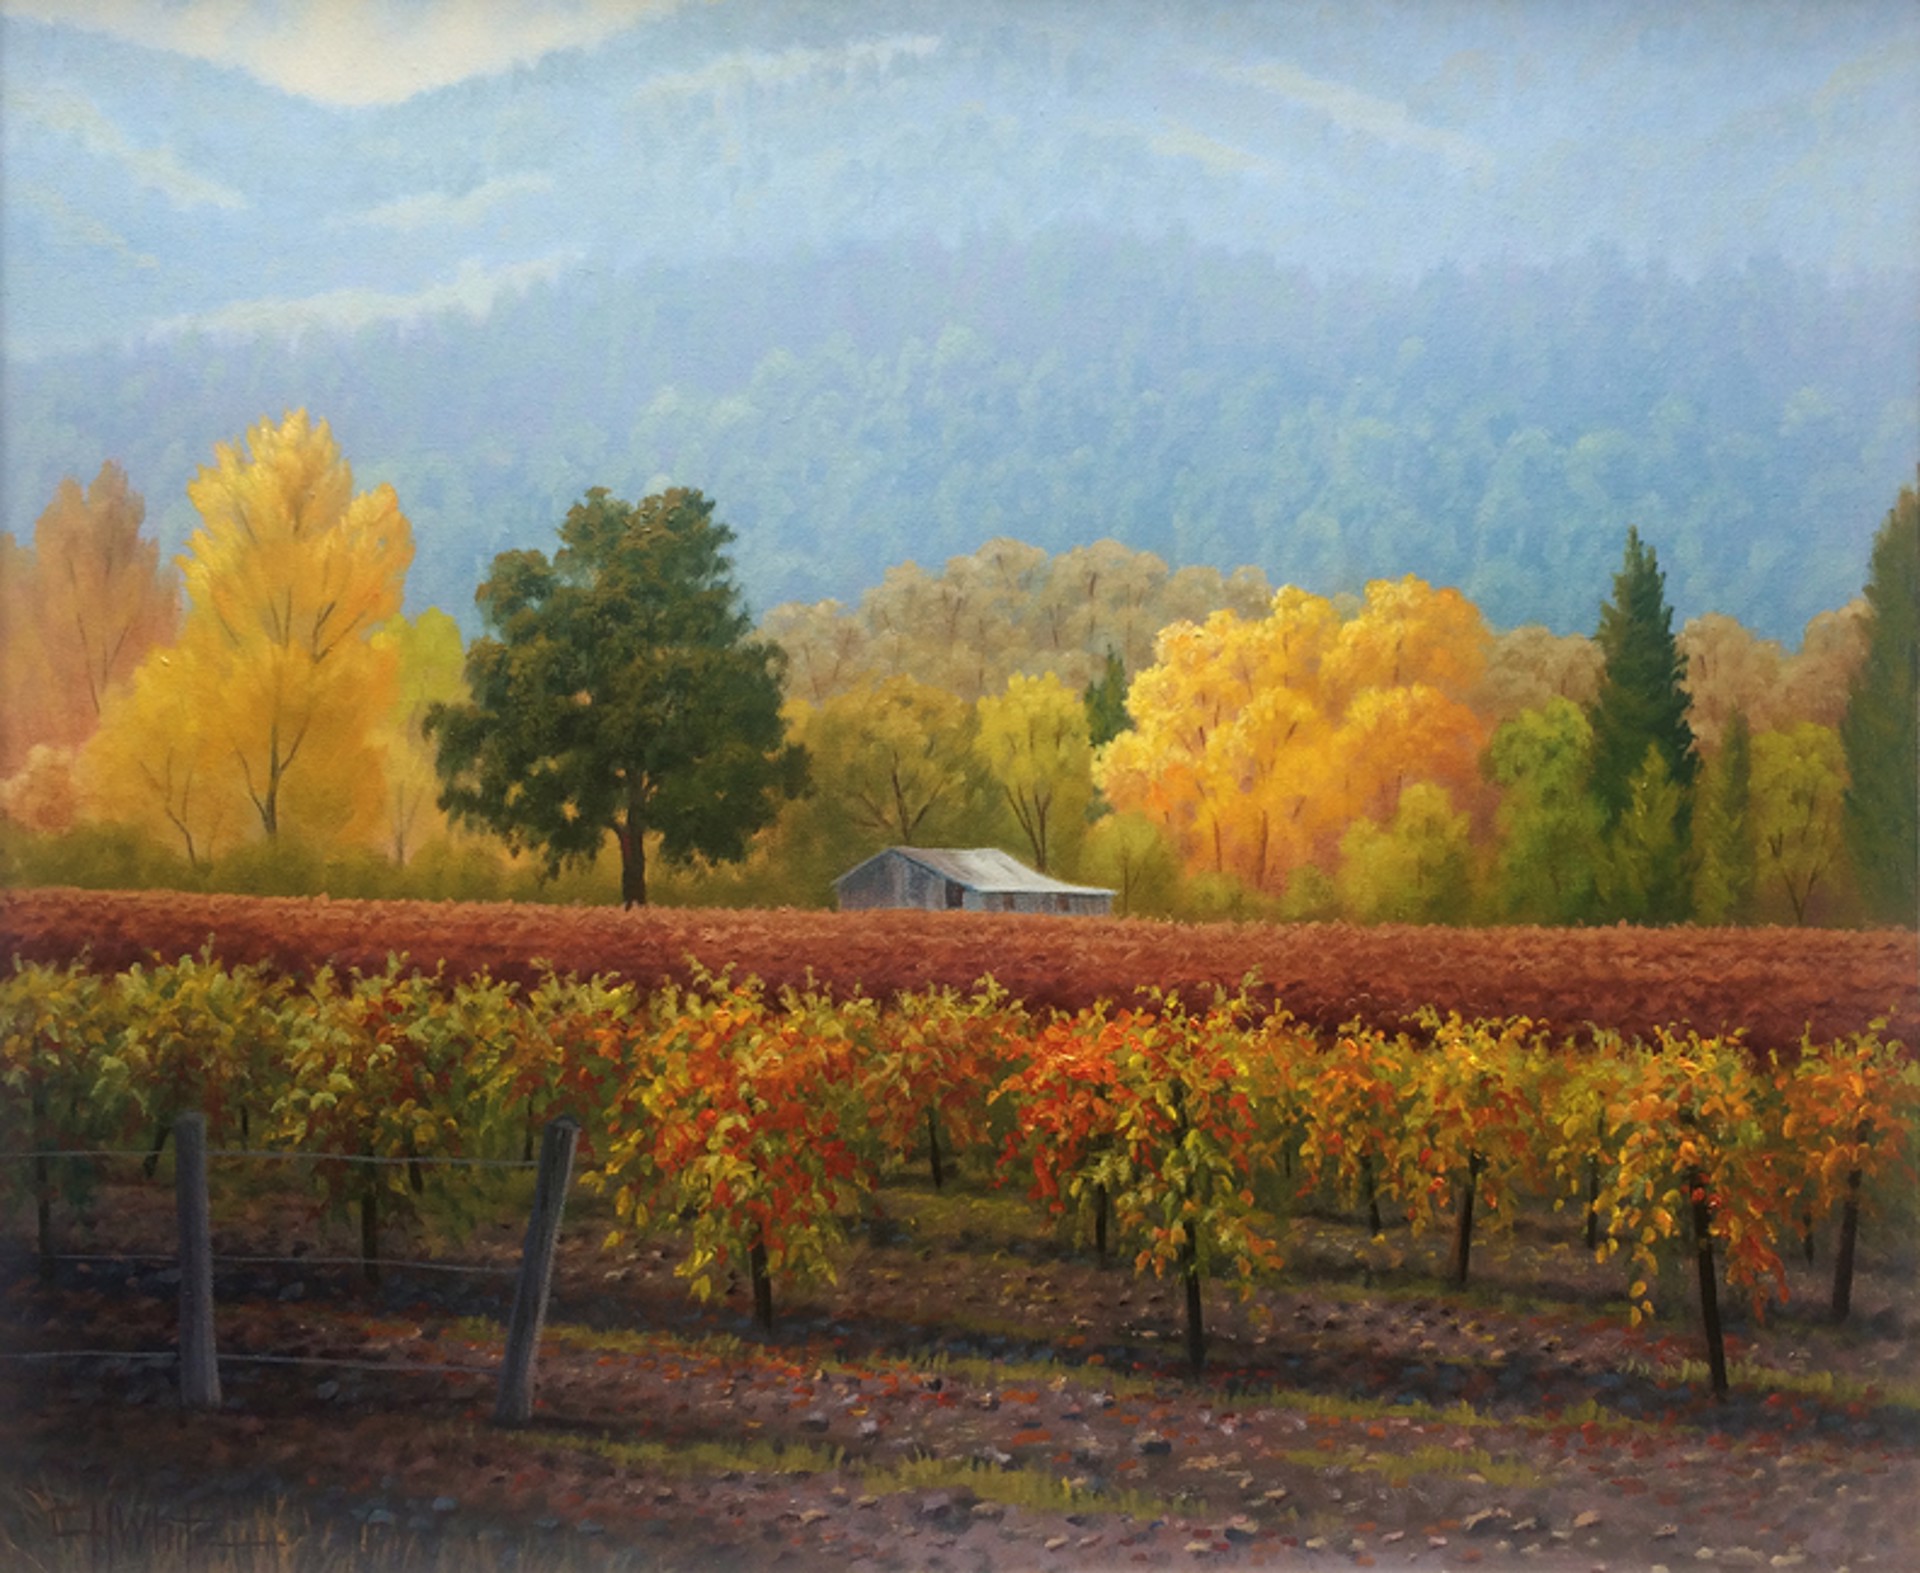 Misty Day Napa Valley by Charles White